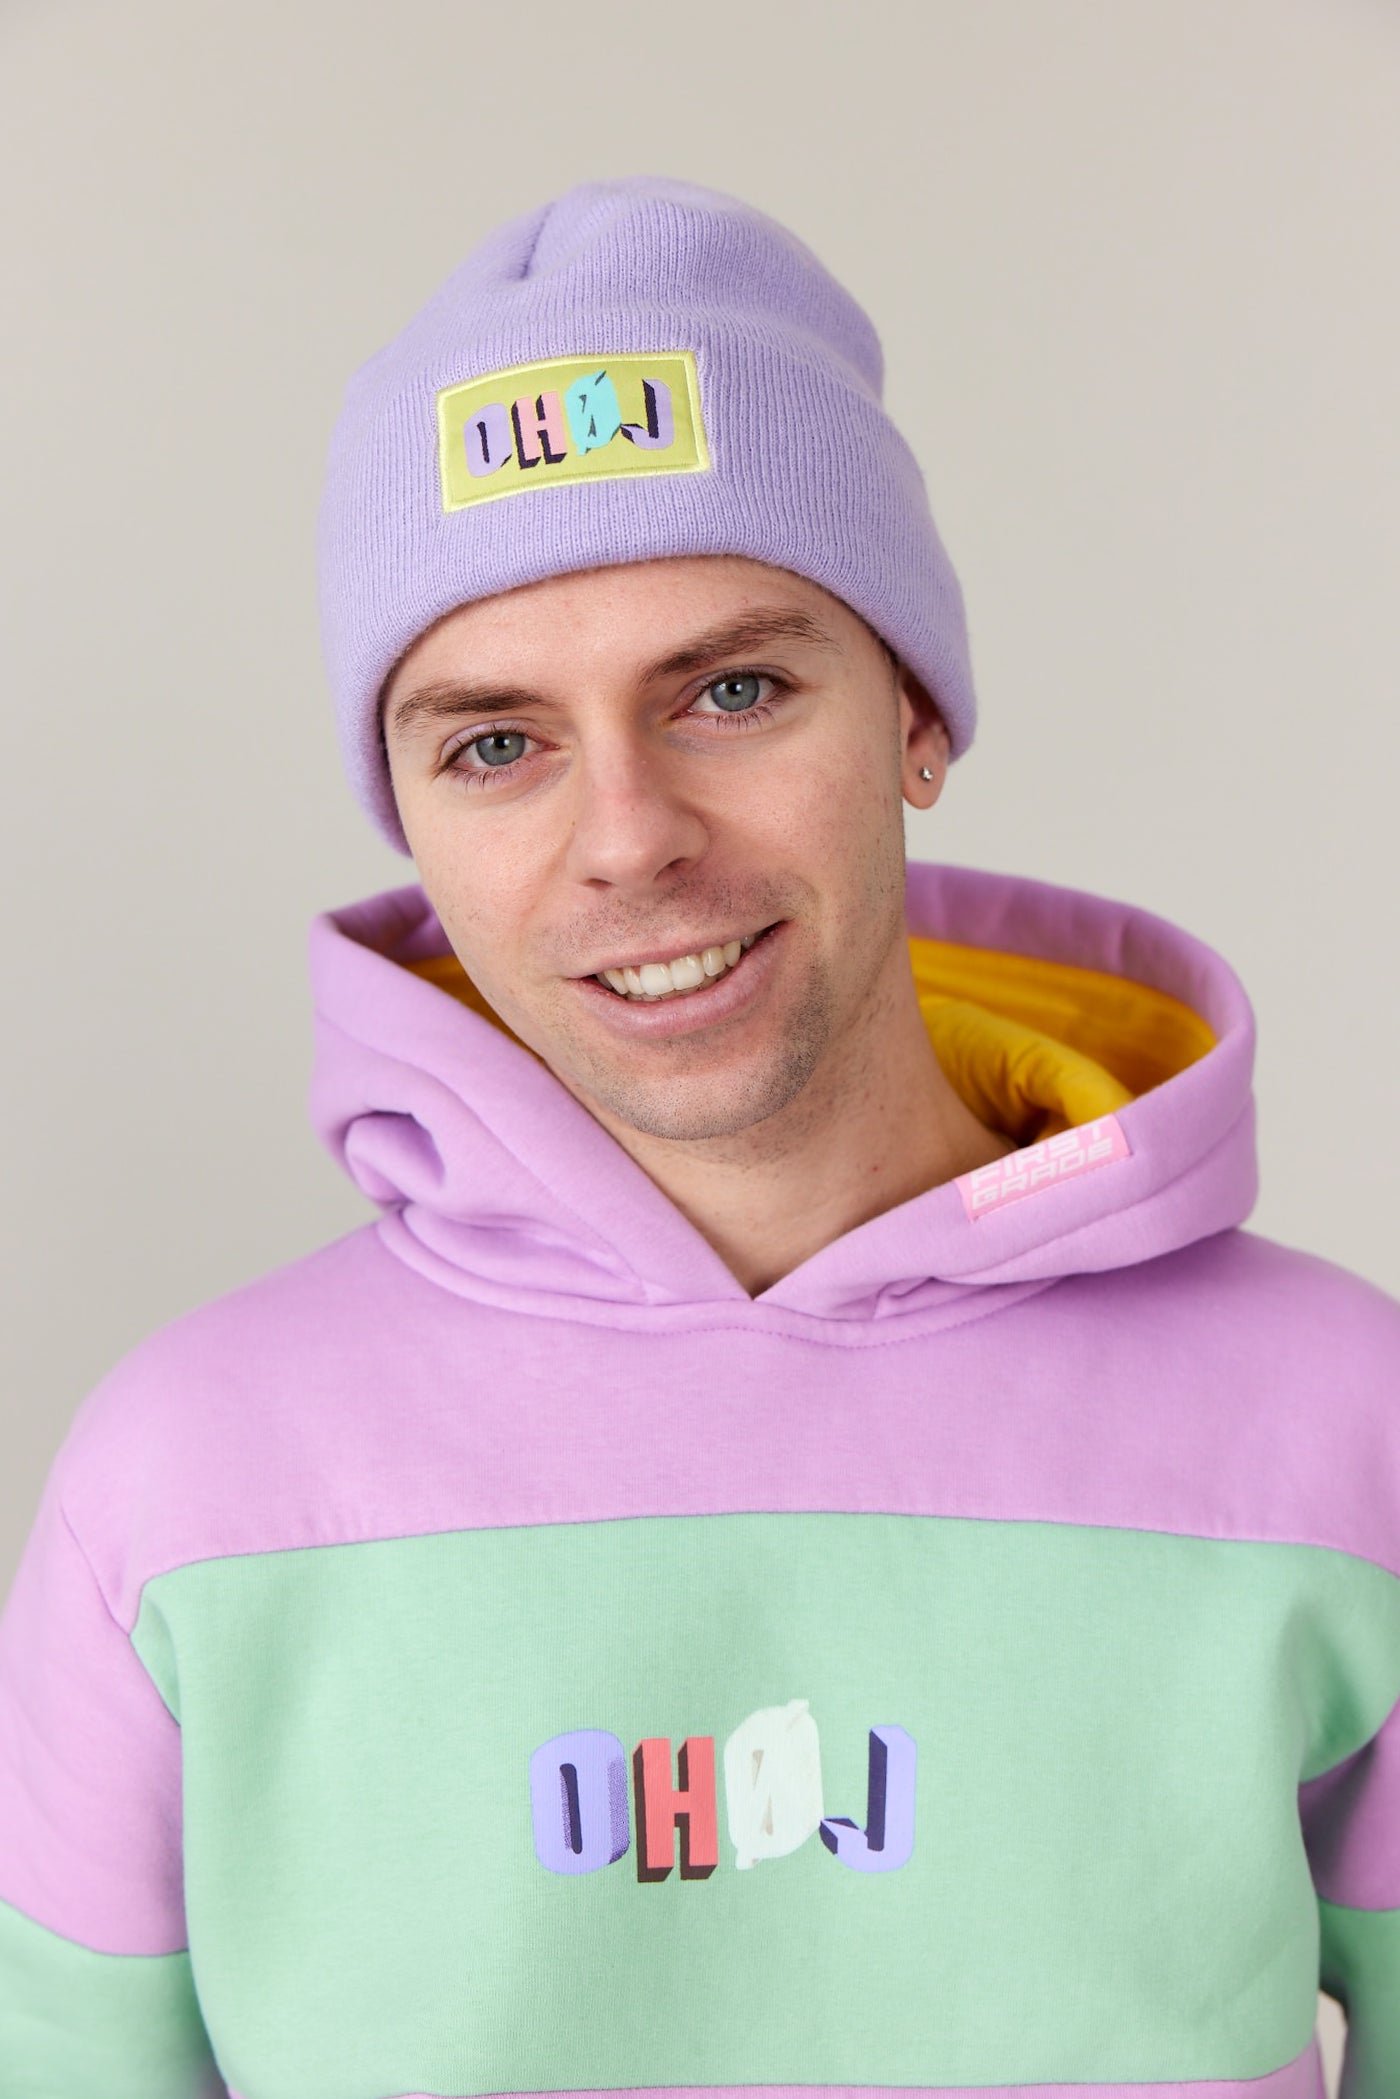 "OHHJ" - COLORFUL - Set (3 parts) + Hat